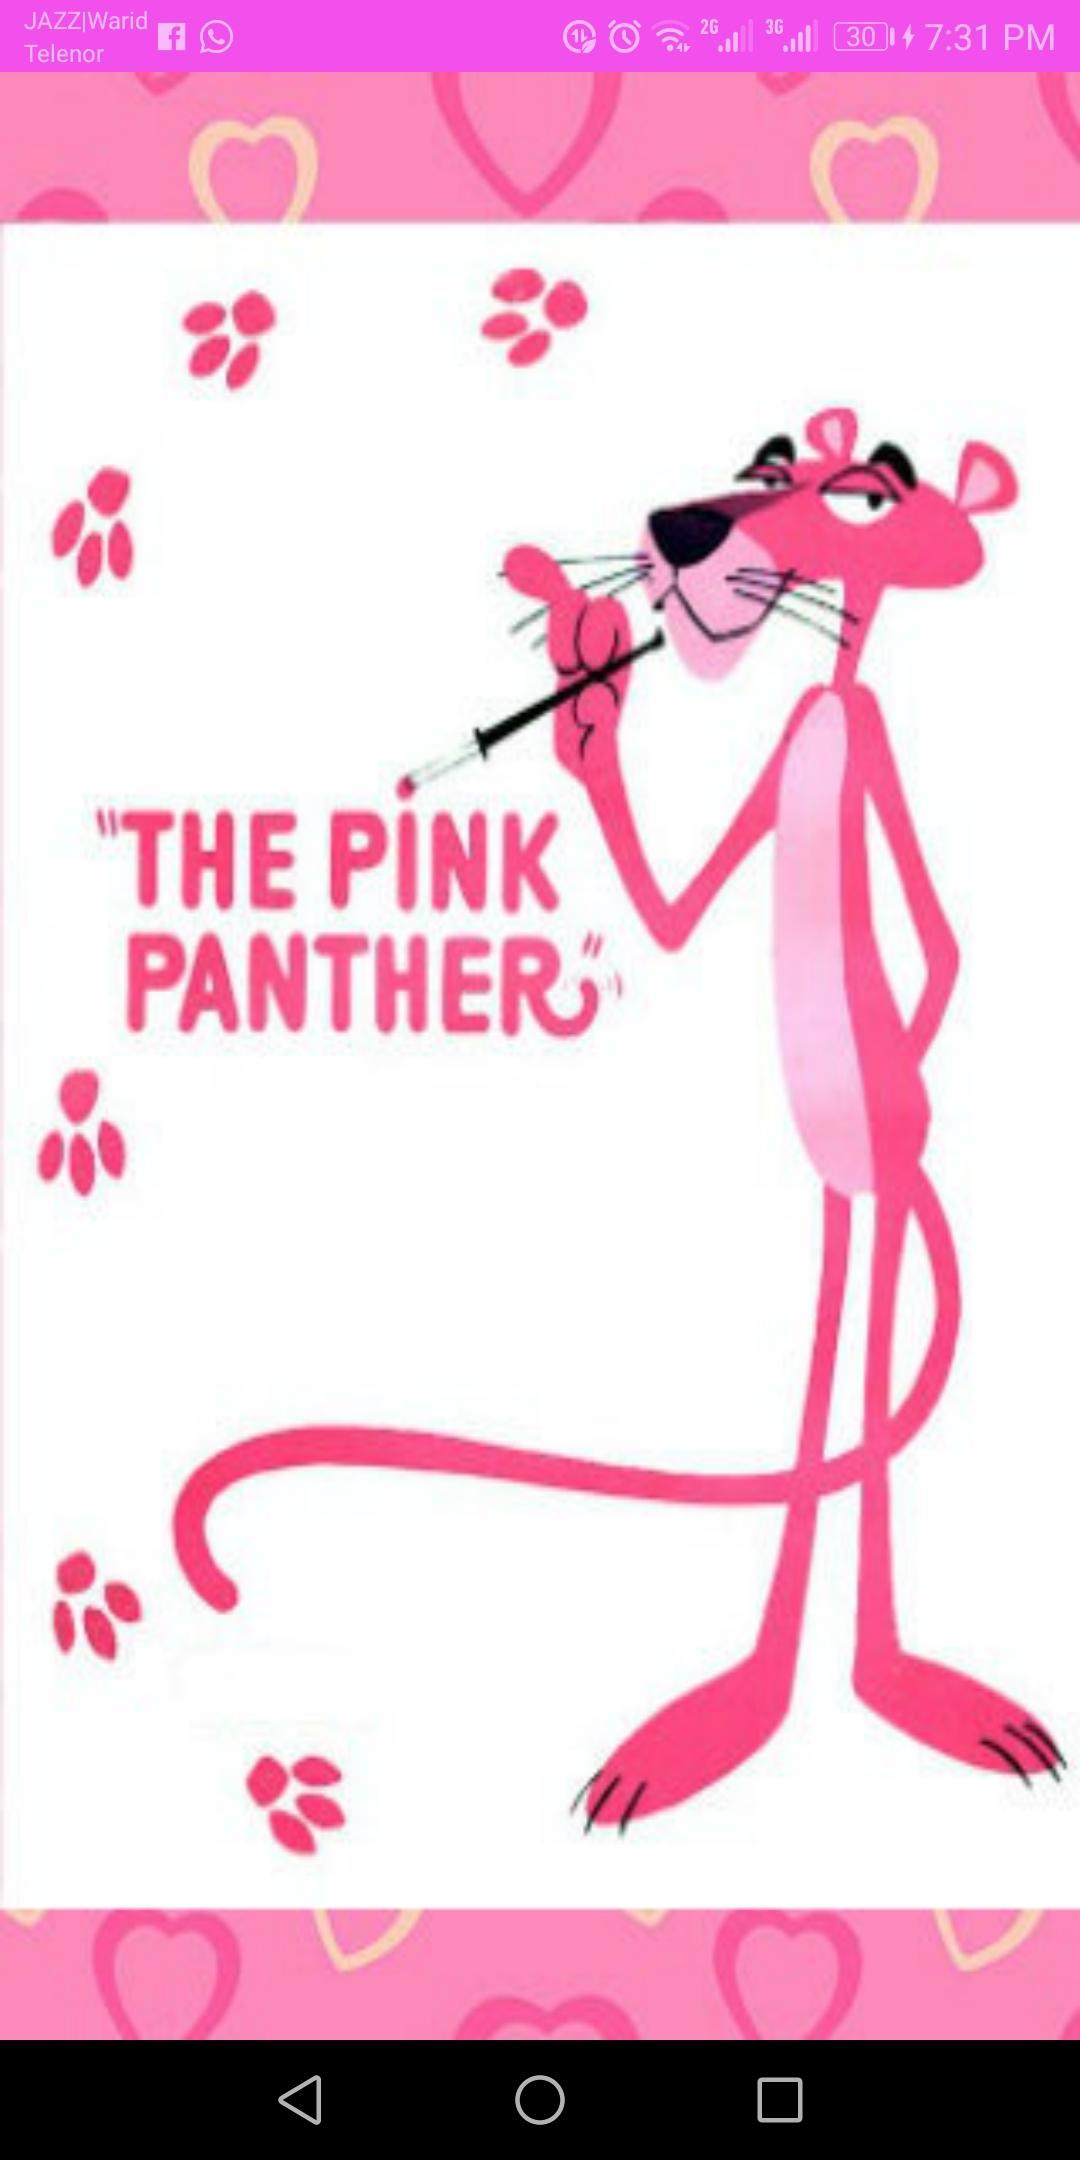 Pink Panther Cartoon - New Collections for Android - APK Download